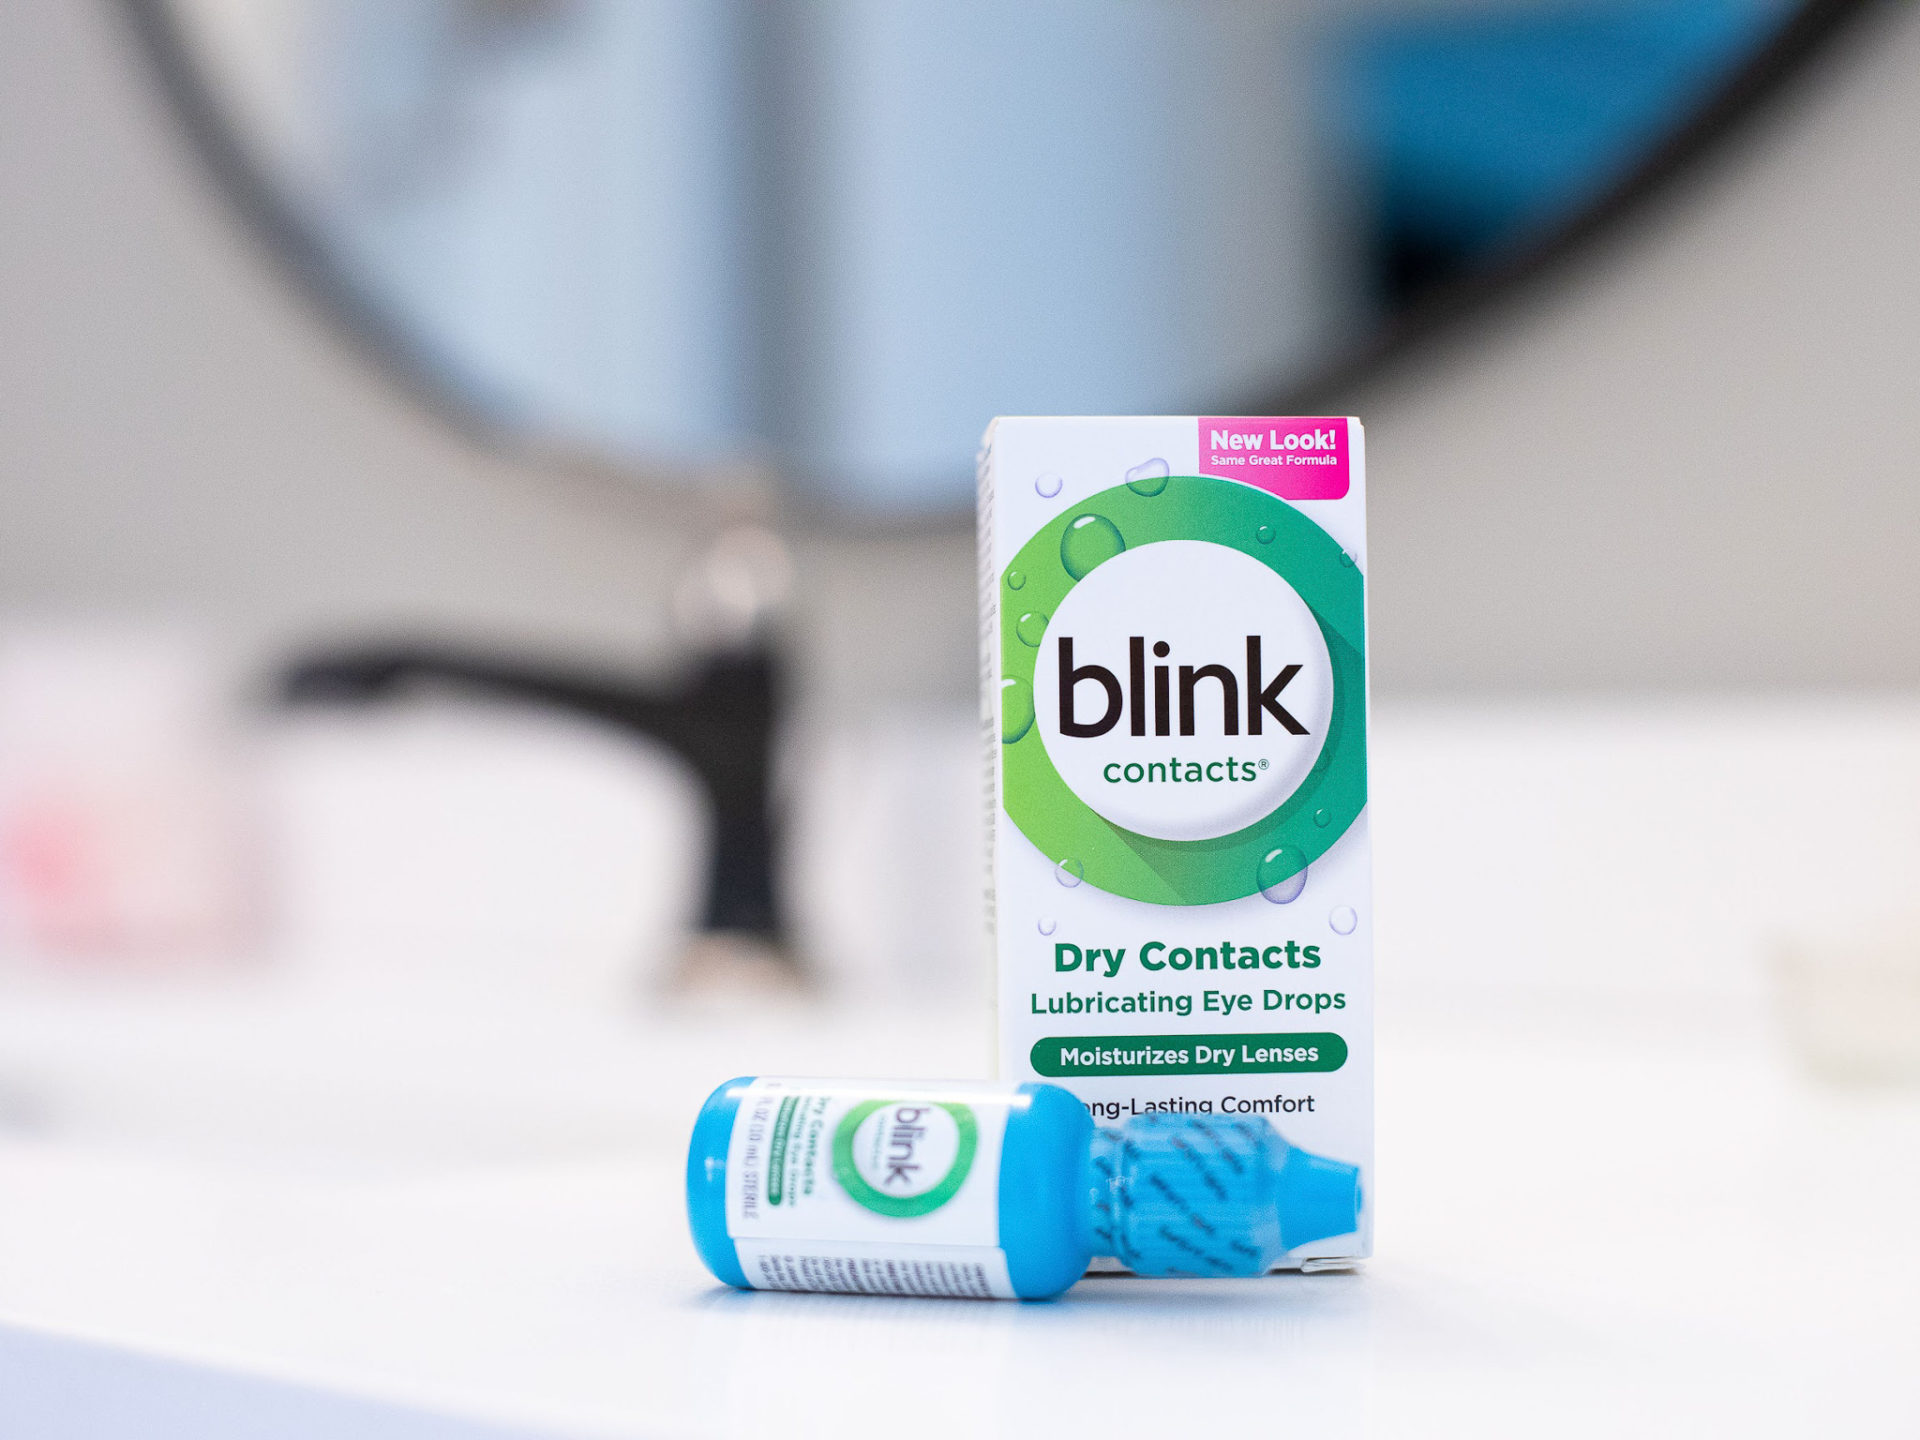 Blink Contacts Lubricating Eye Drops Just $3.49 At Kroger – Less Than Half Price